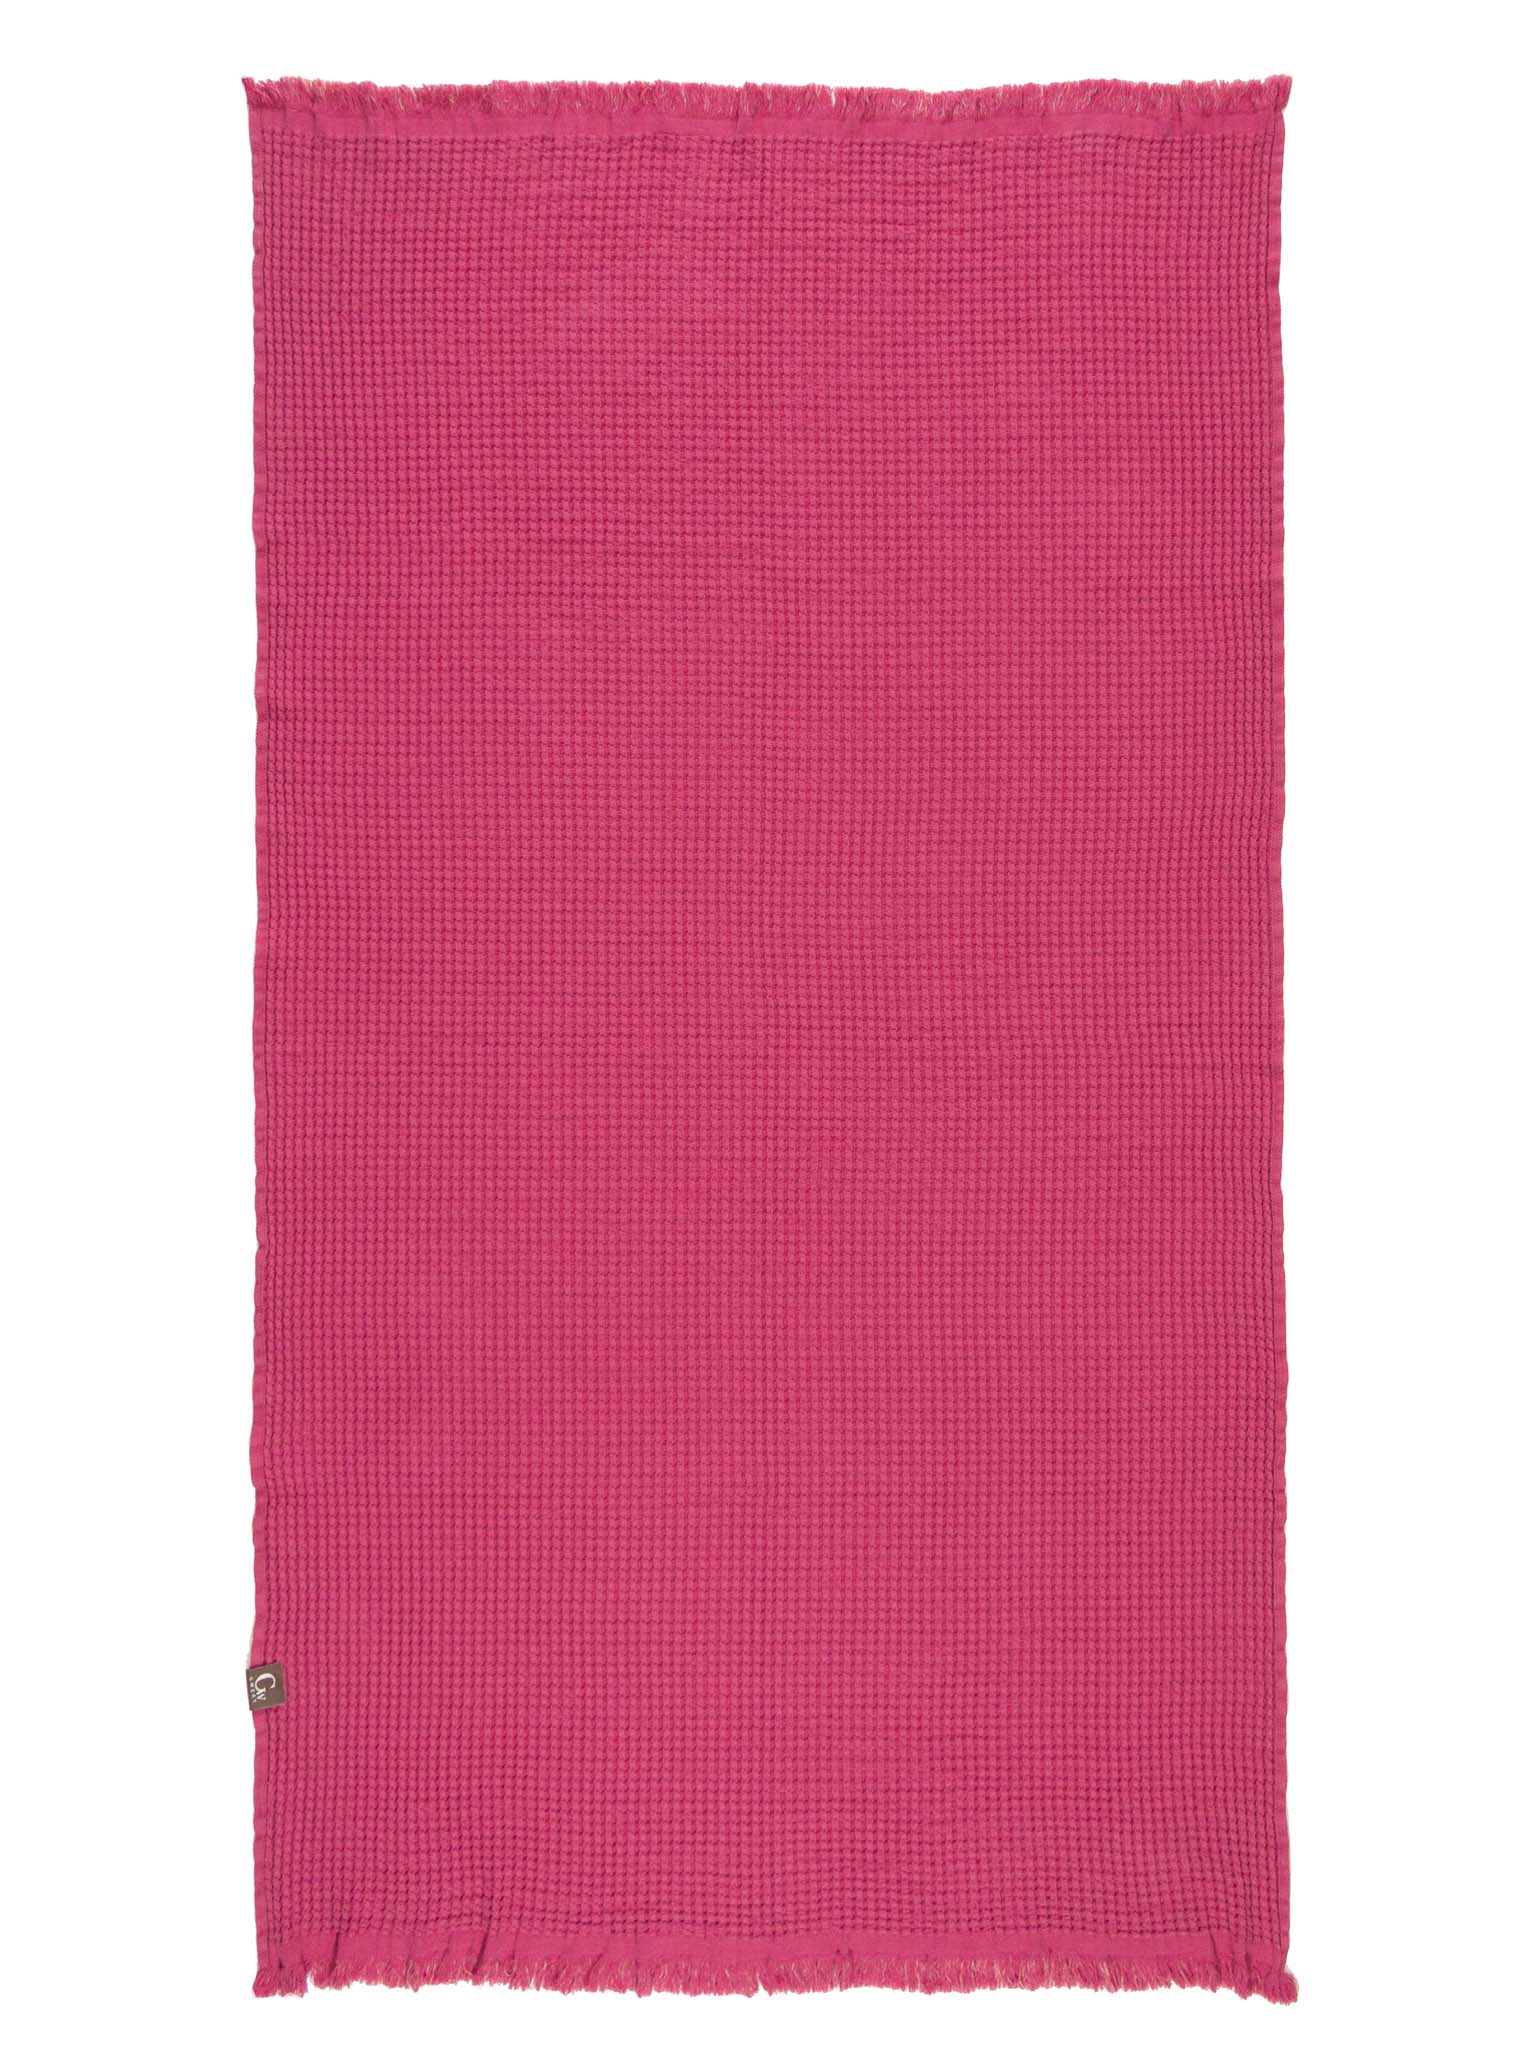 Pink double sided, honeycomb beach towel open up